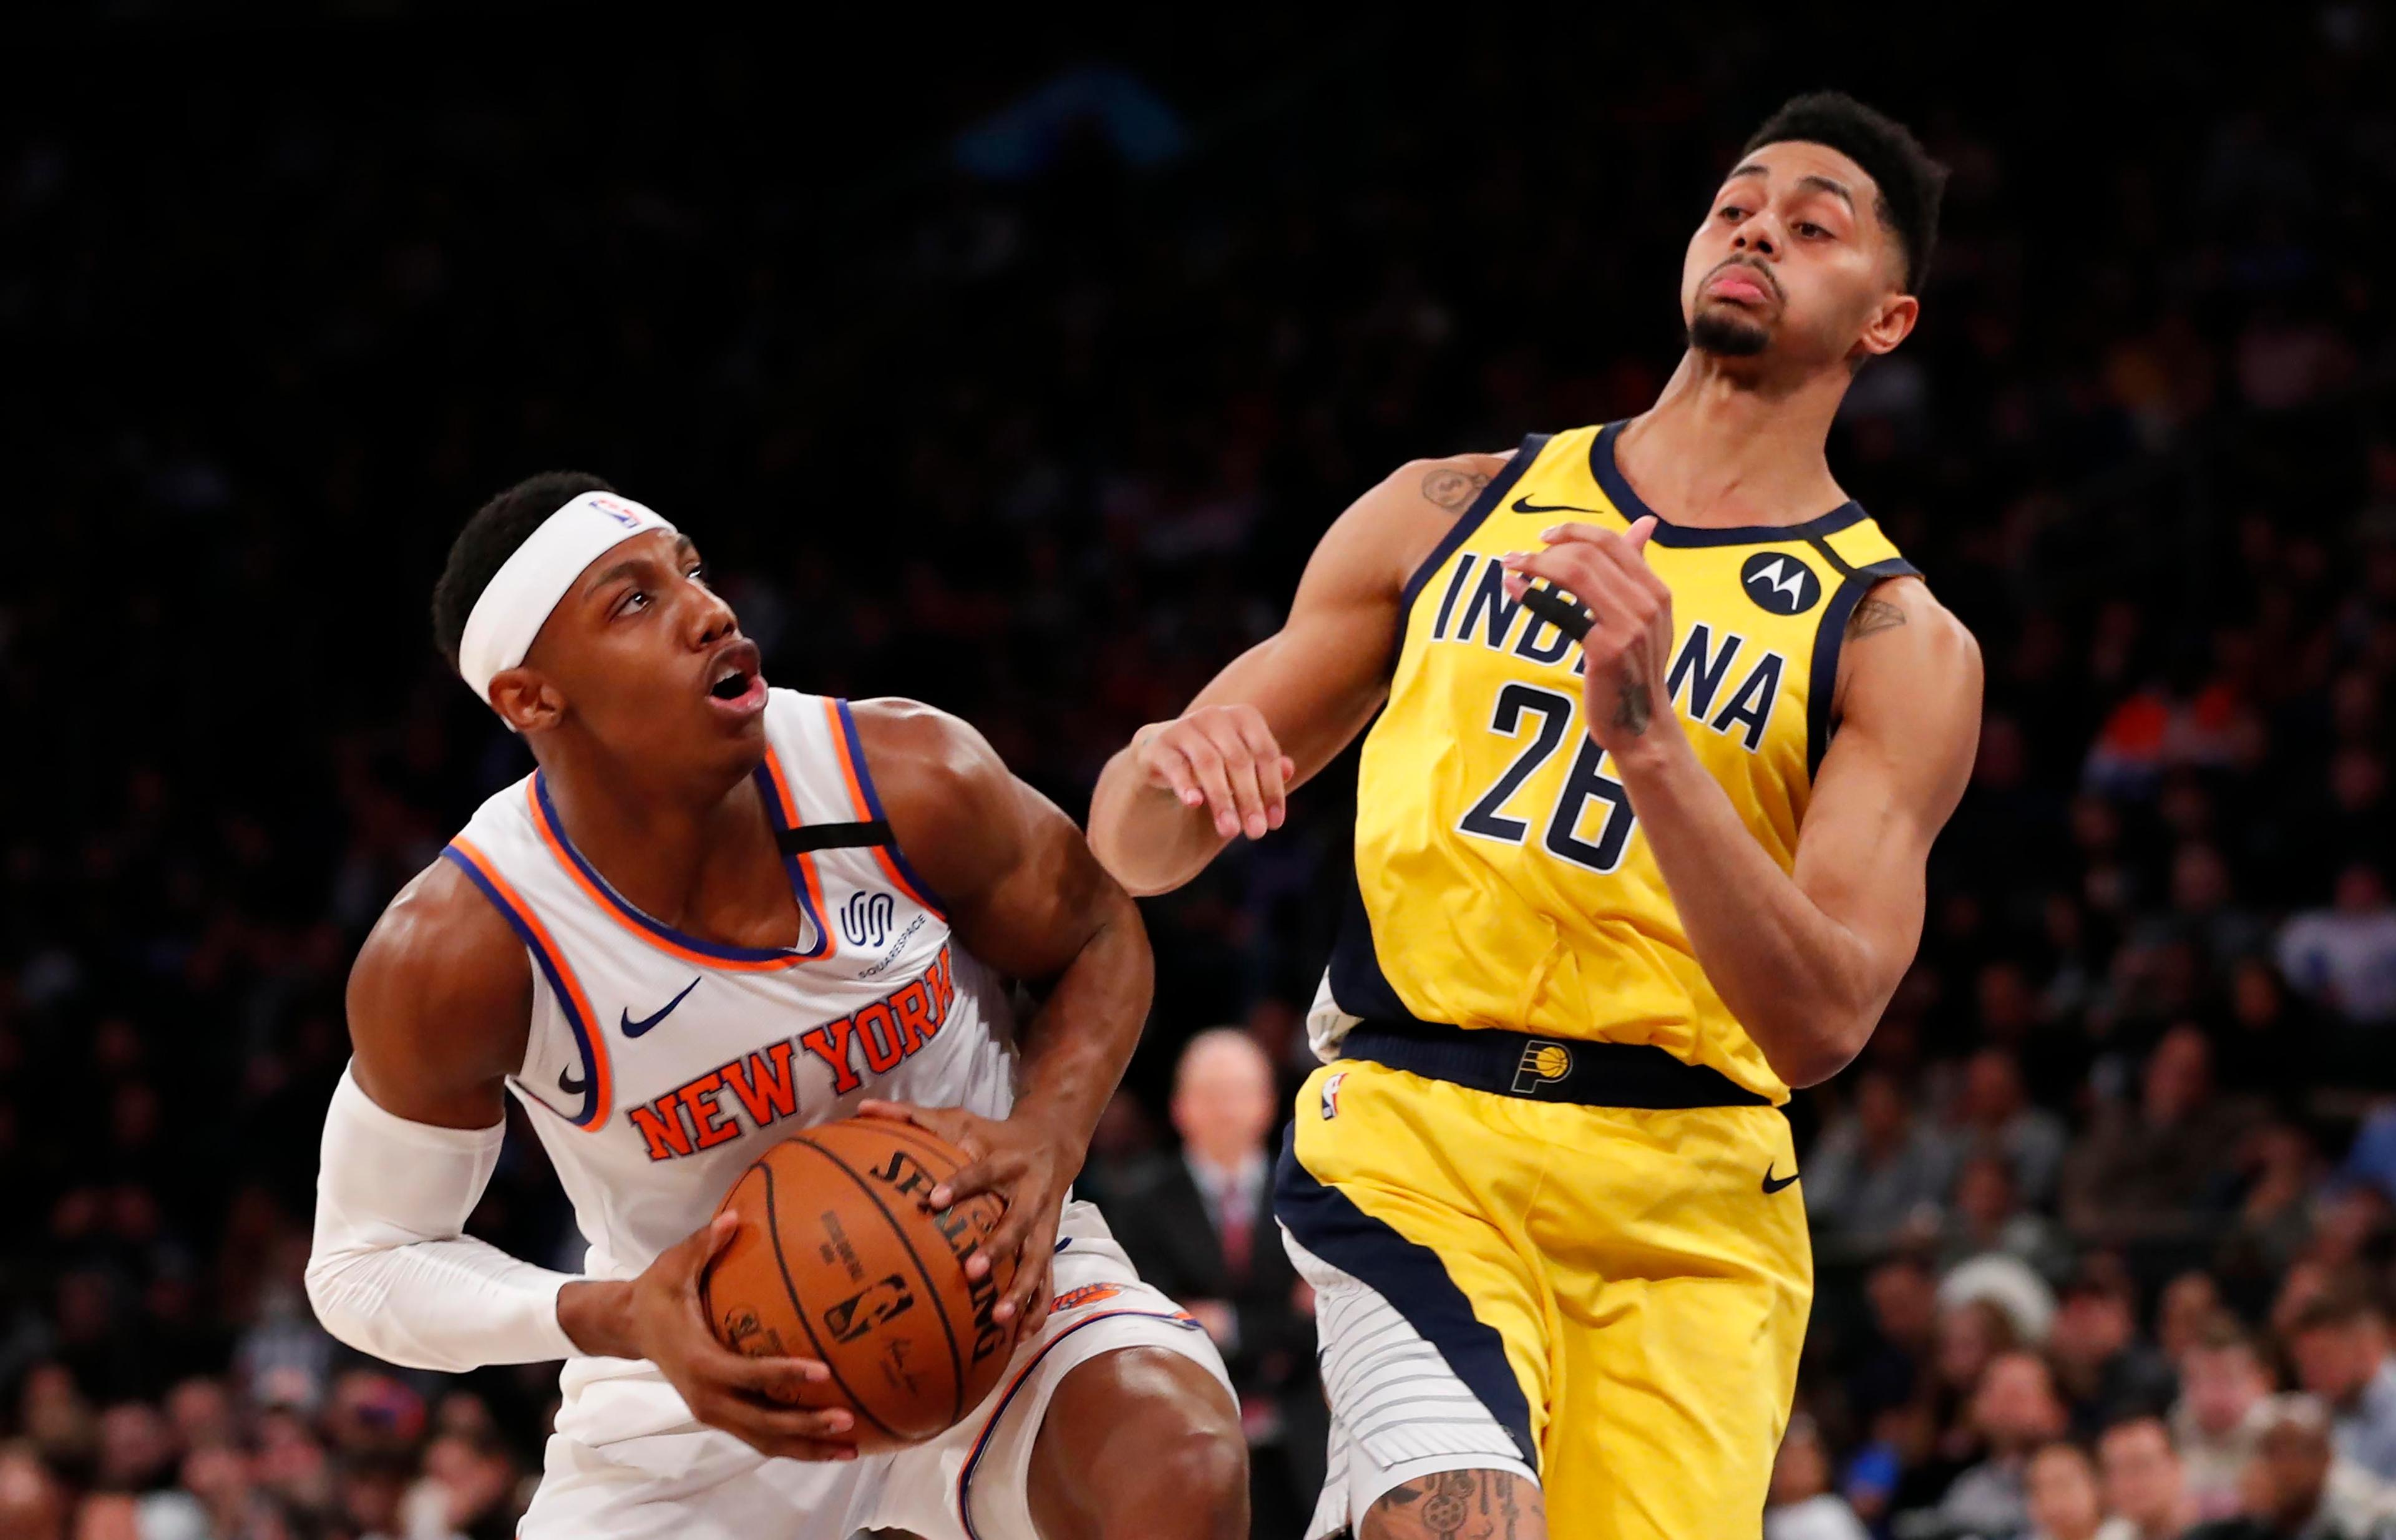 RJ Barrett goes against Pacers' Jeremy Lamb / USA TODAY